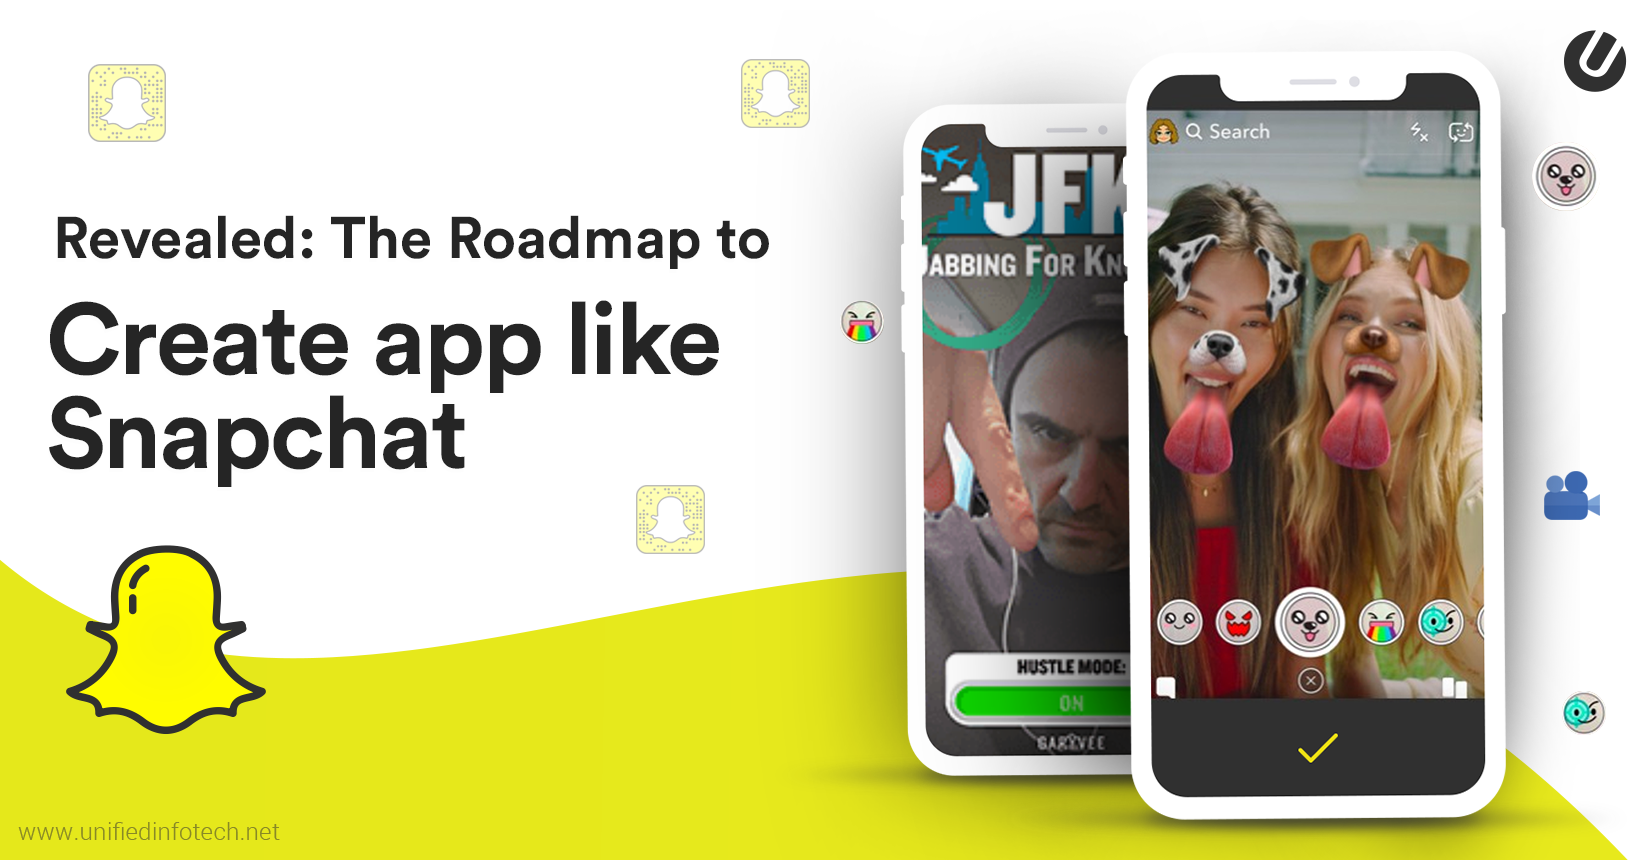 An App Like Snapchat: How Are You Going To Make One?